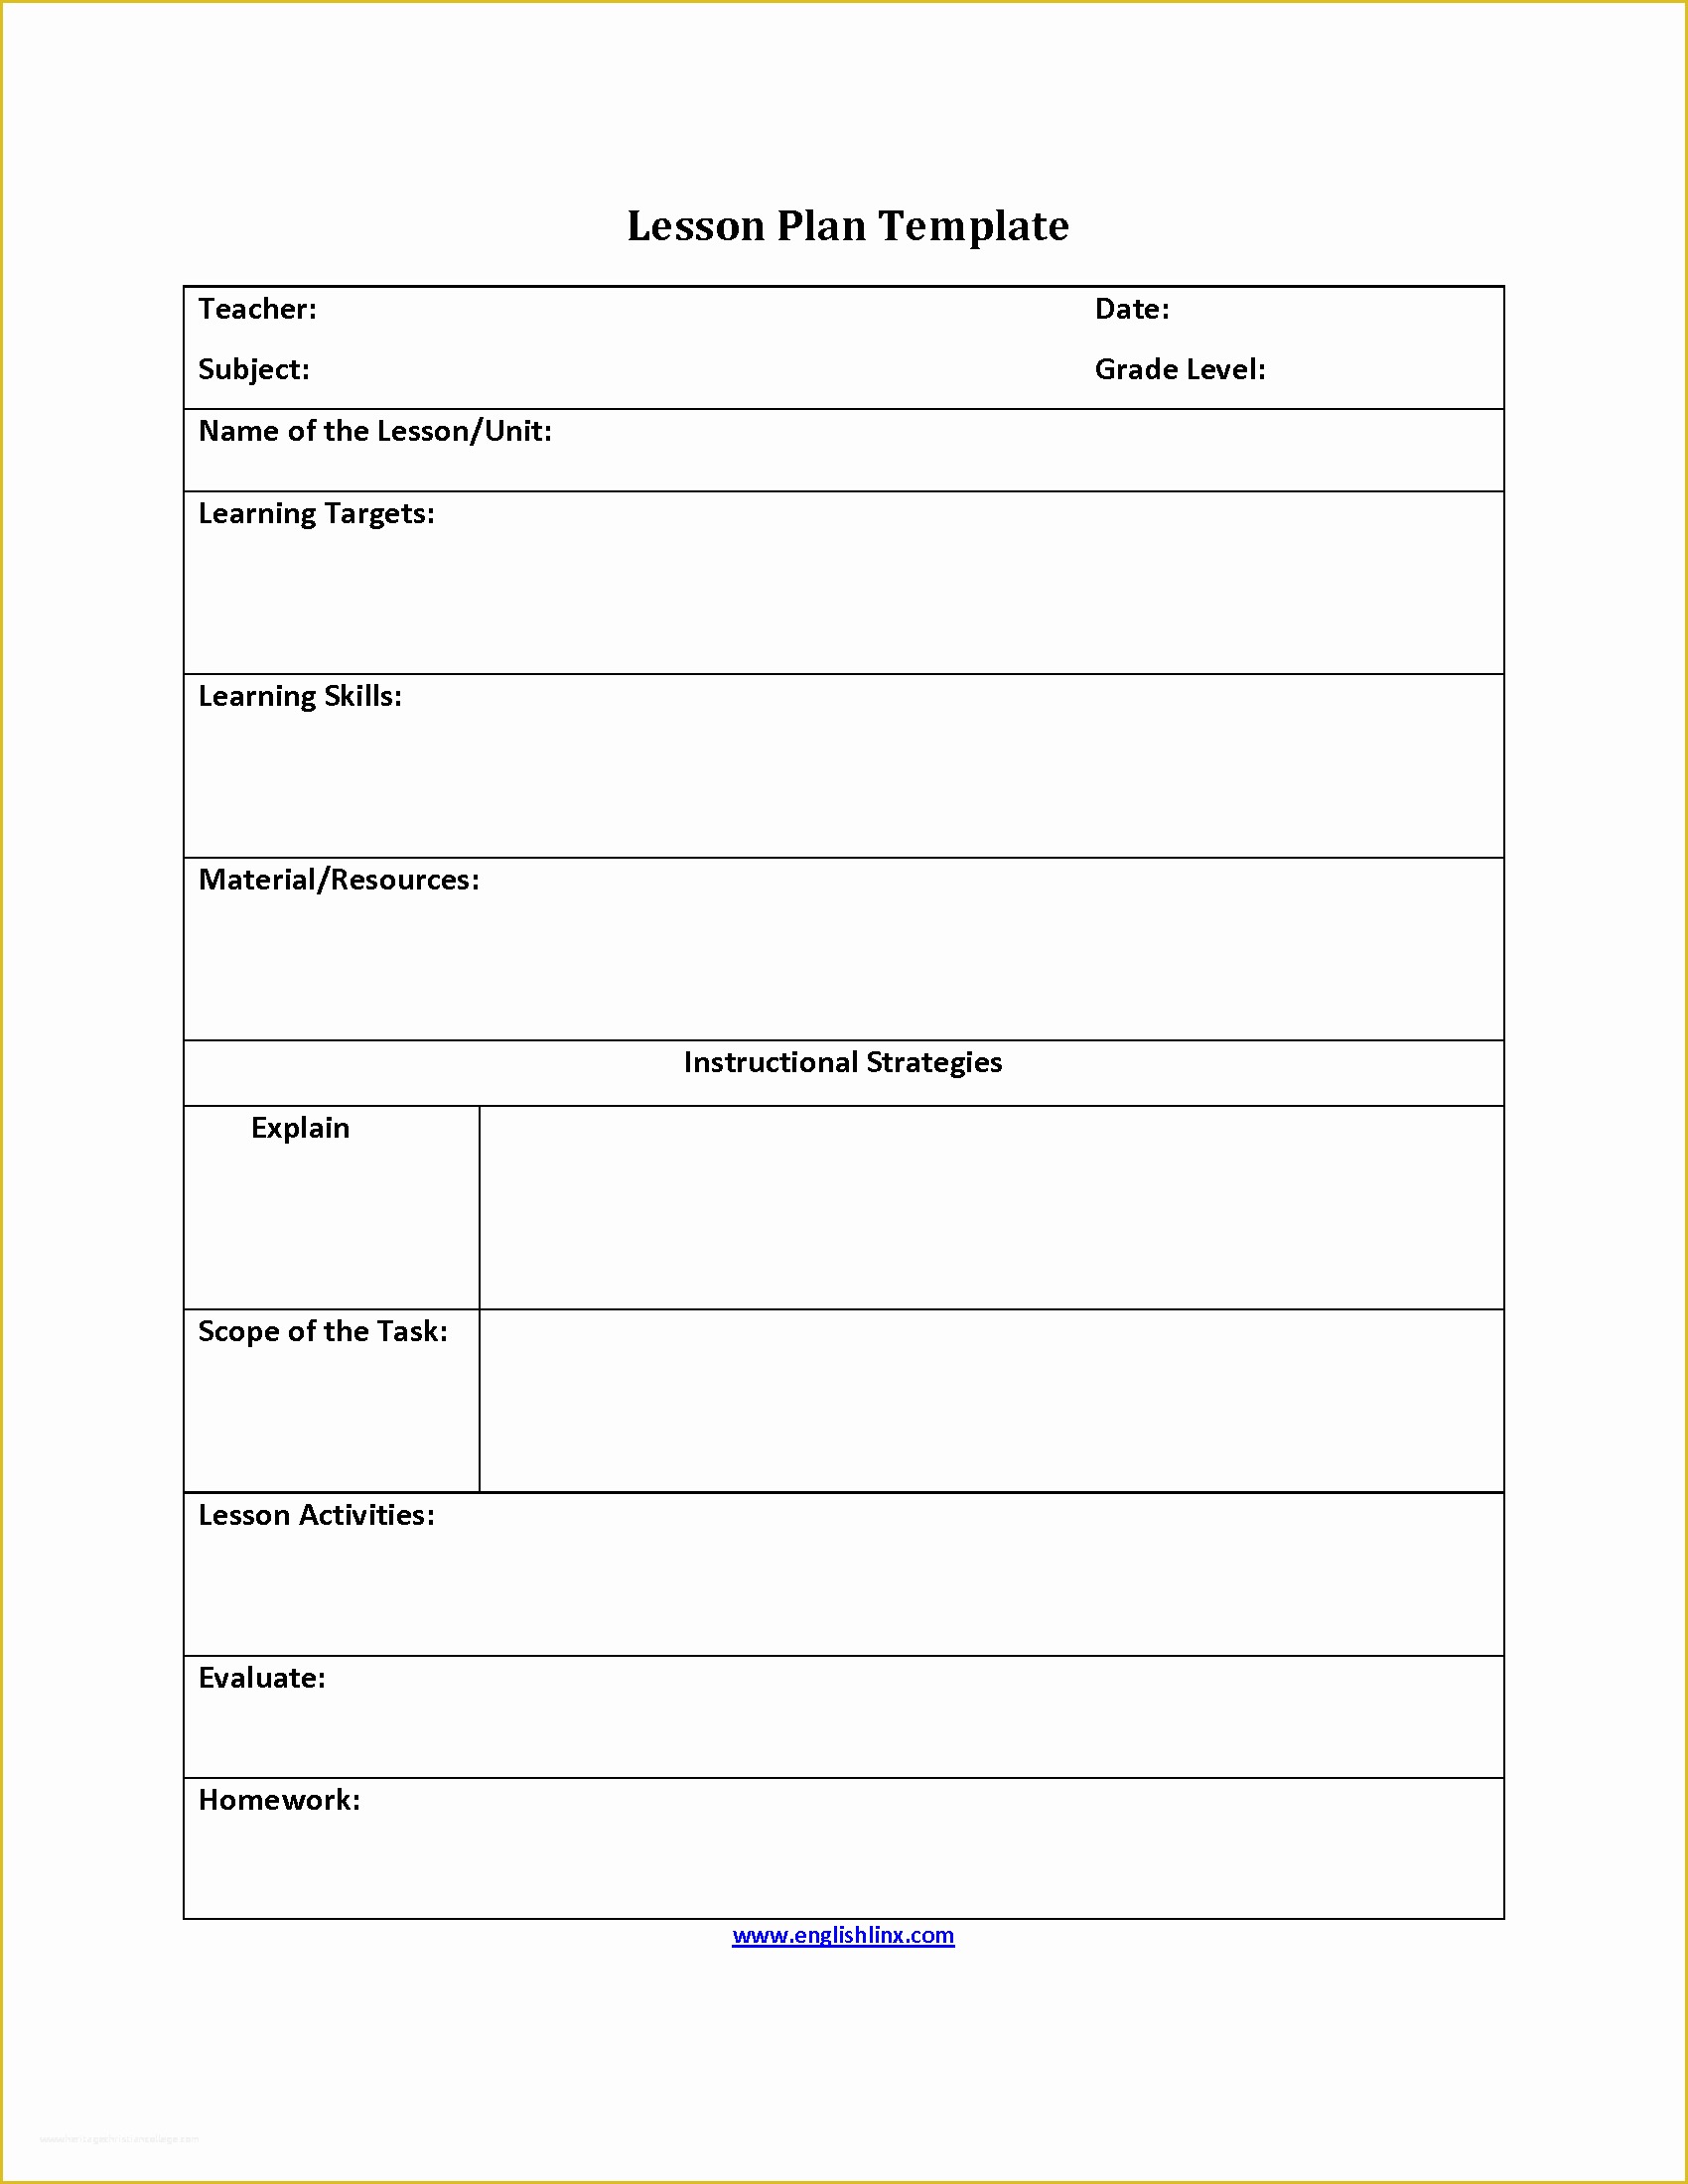 Free Lesson Plan Template Word Of Lesson Plan Template